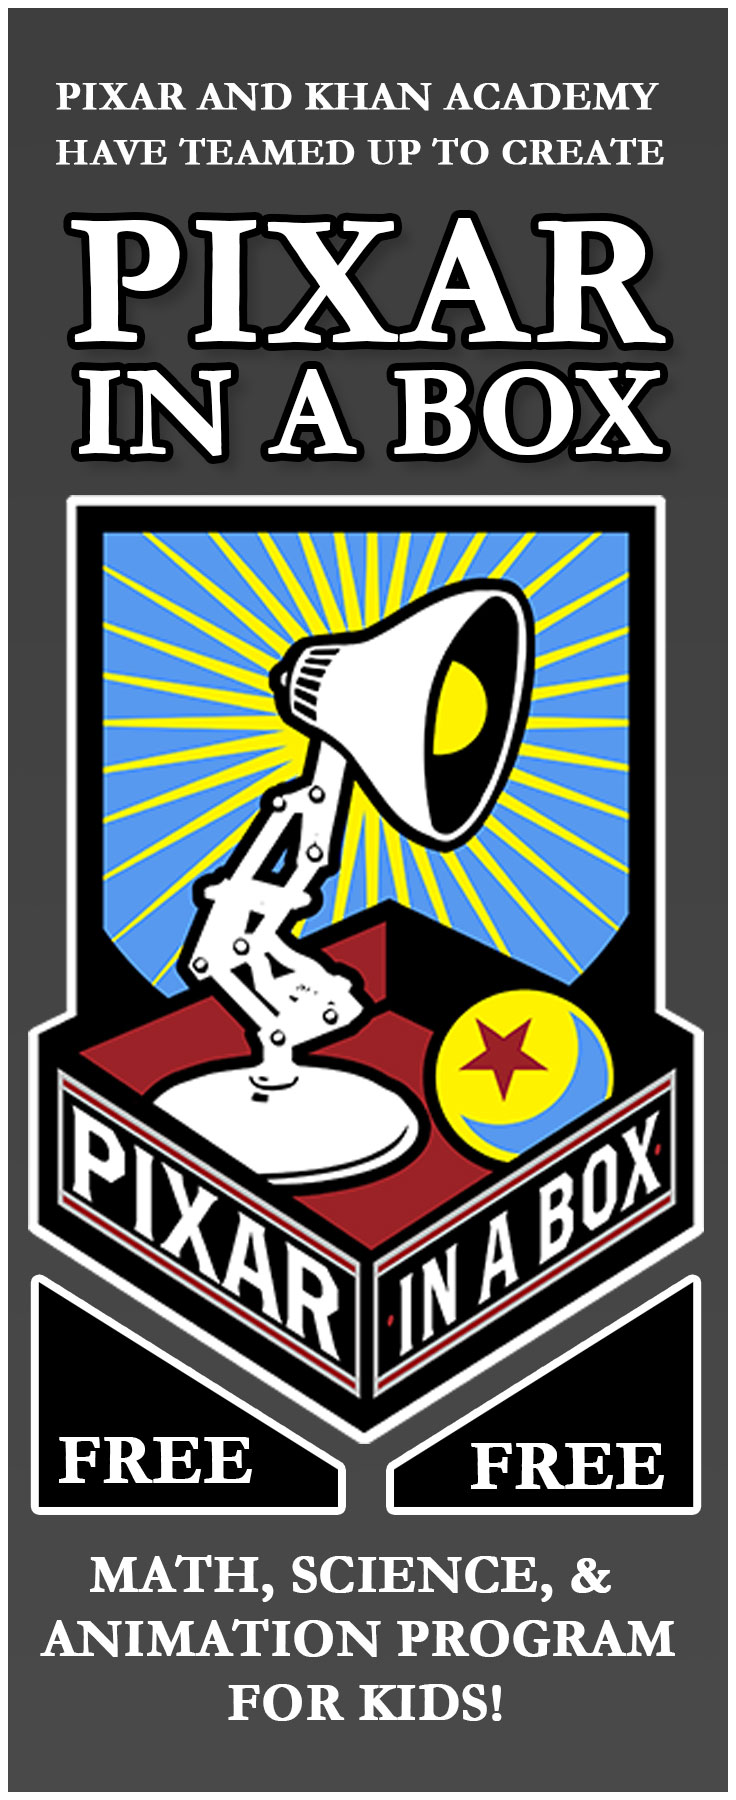 Pixar in a Box, free, online educational program for kids created by Pixar